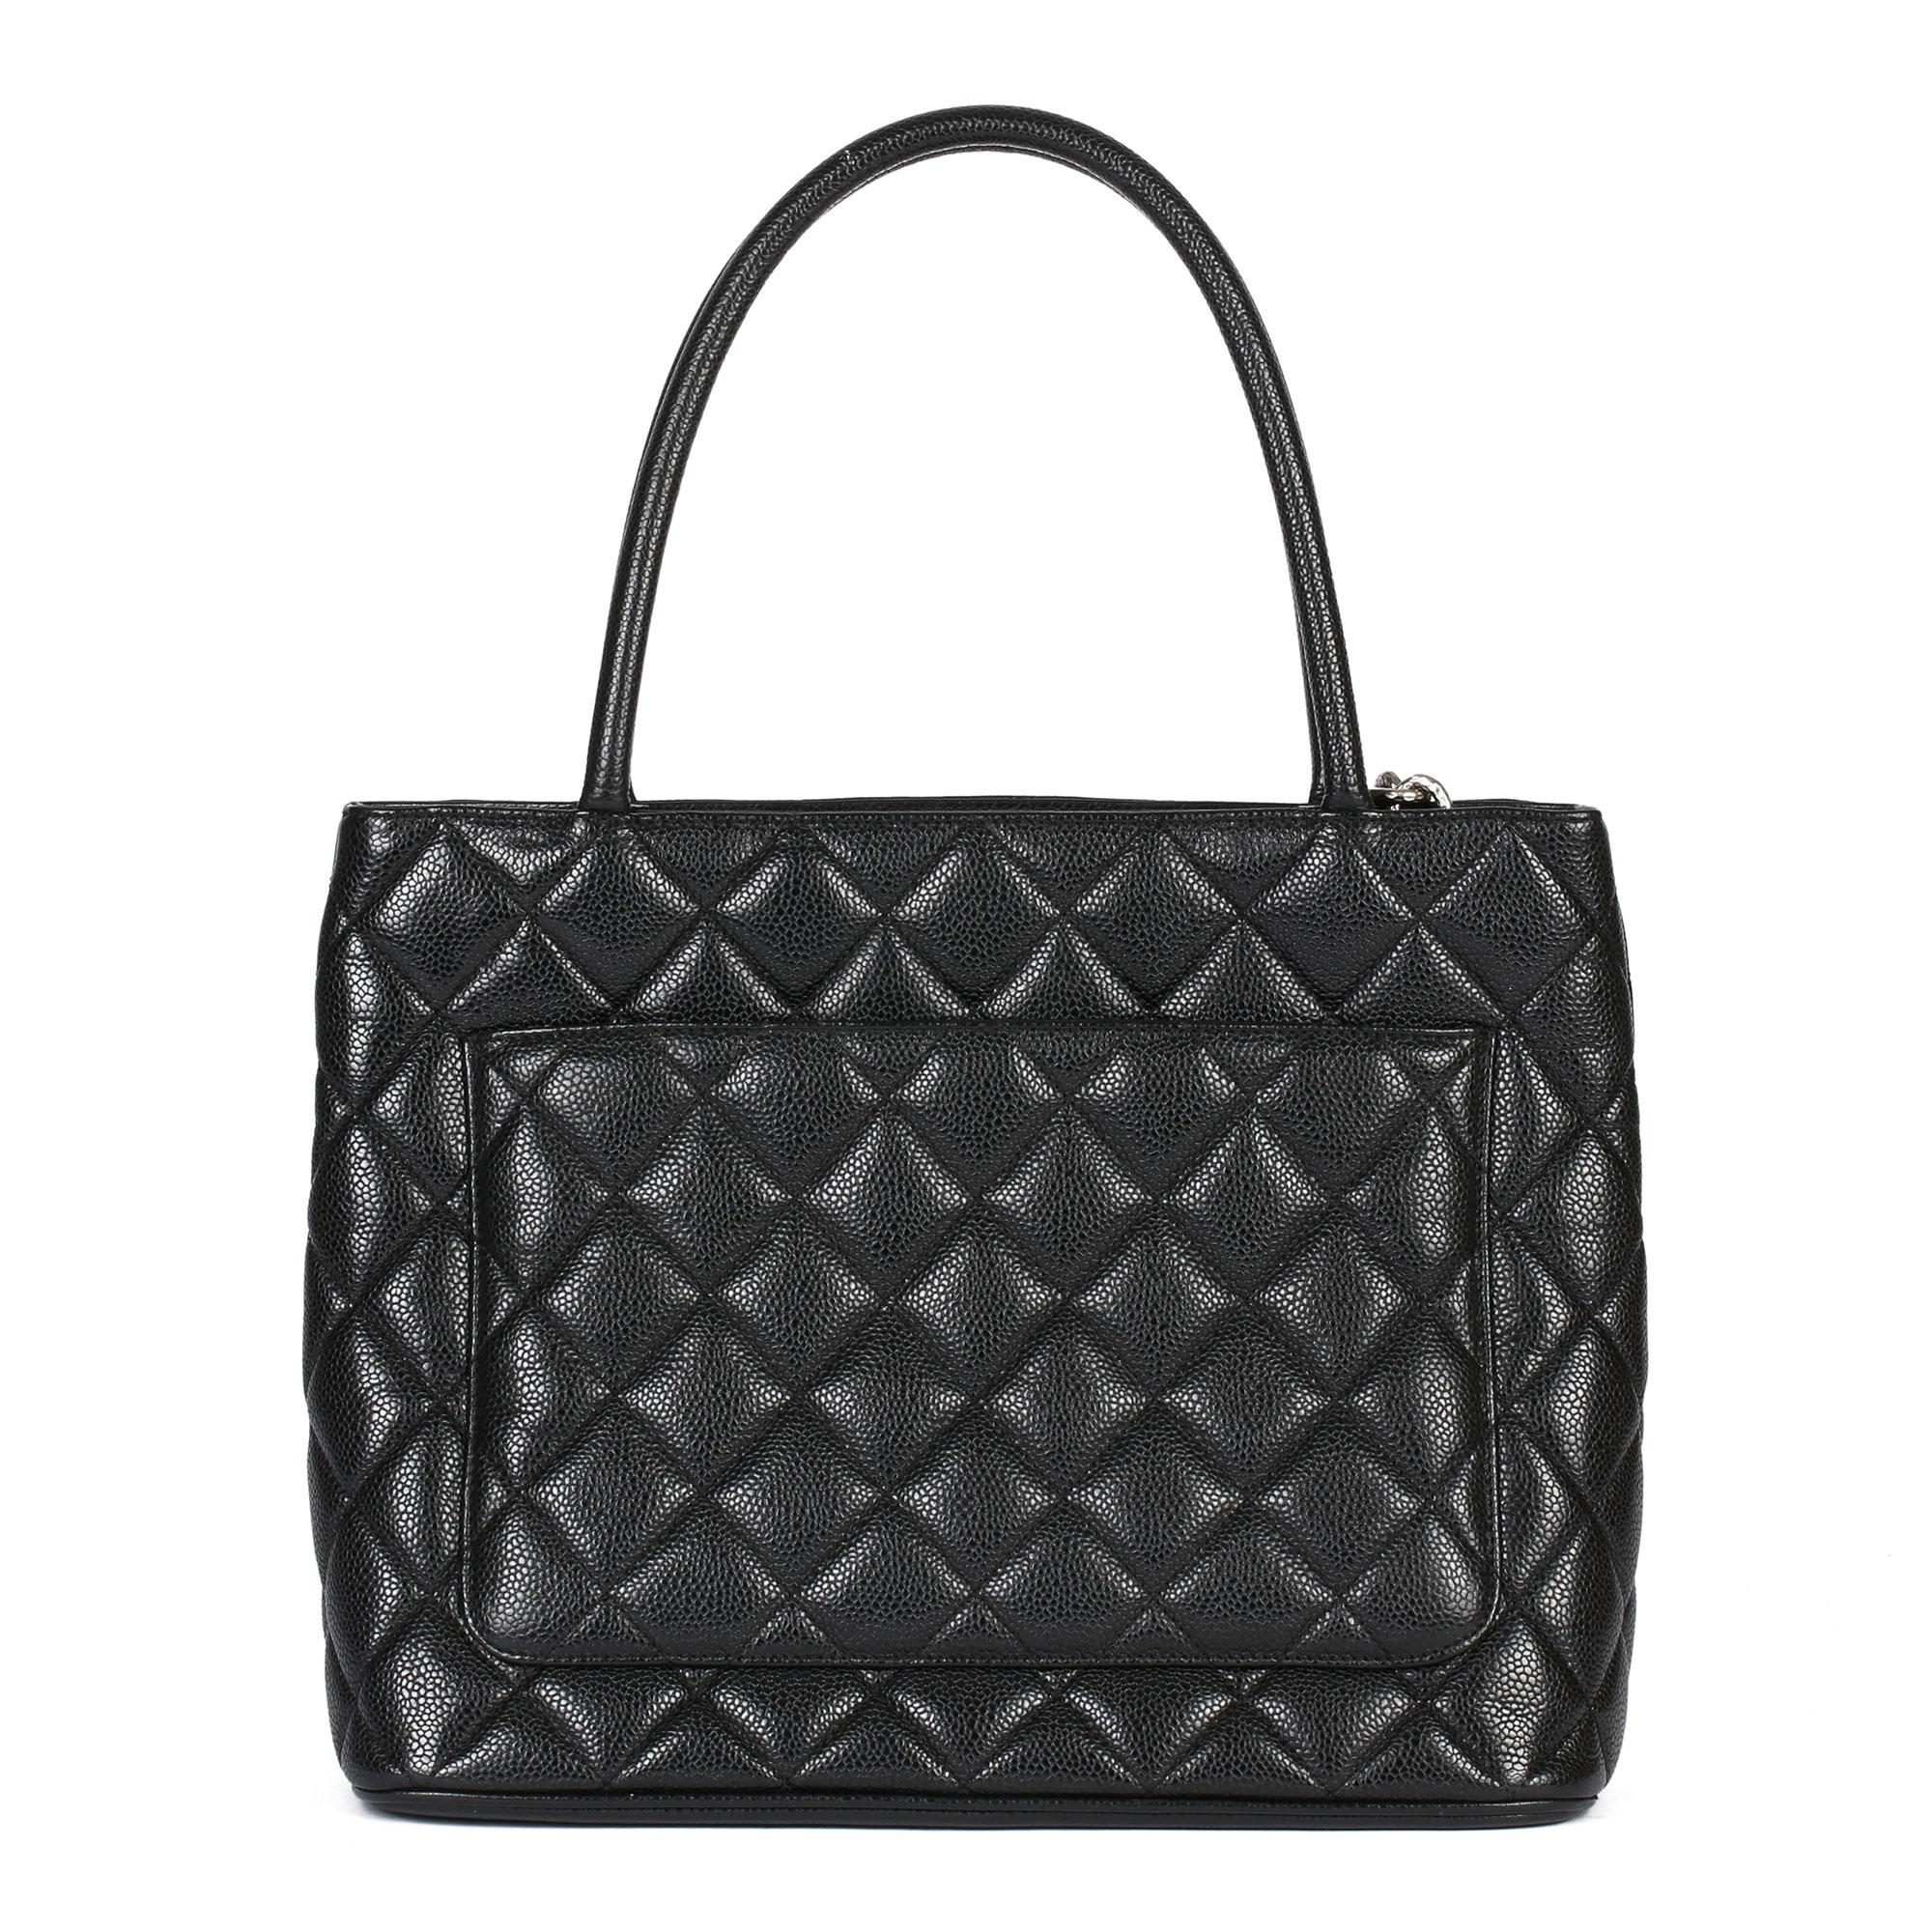 2002 Chanel Black Quilted Caviar Leather Vintage Medallion Tote  1